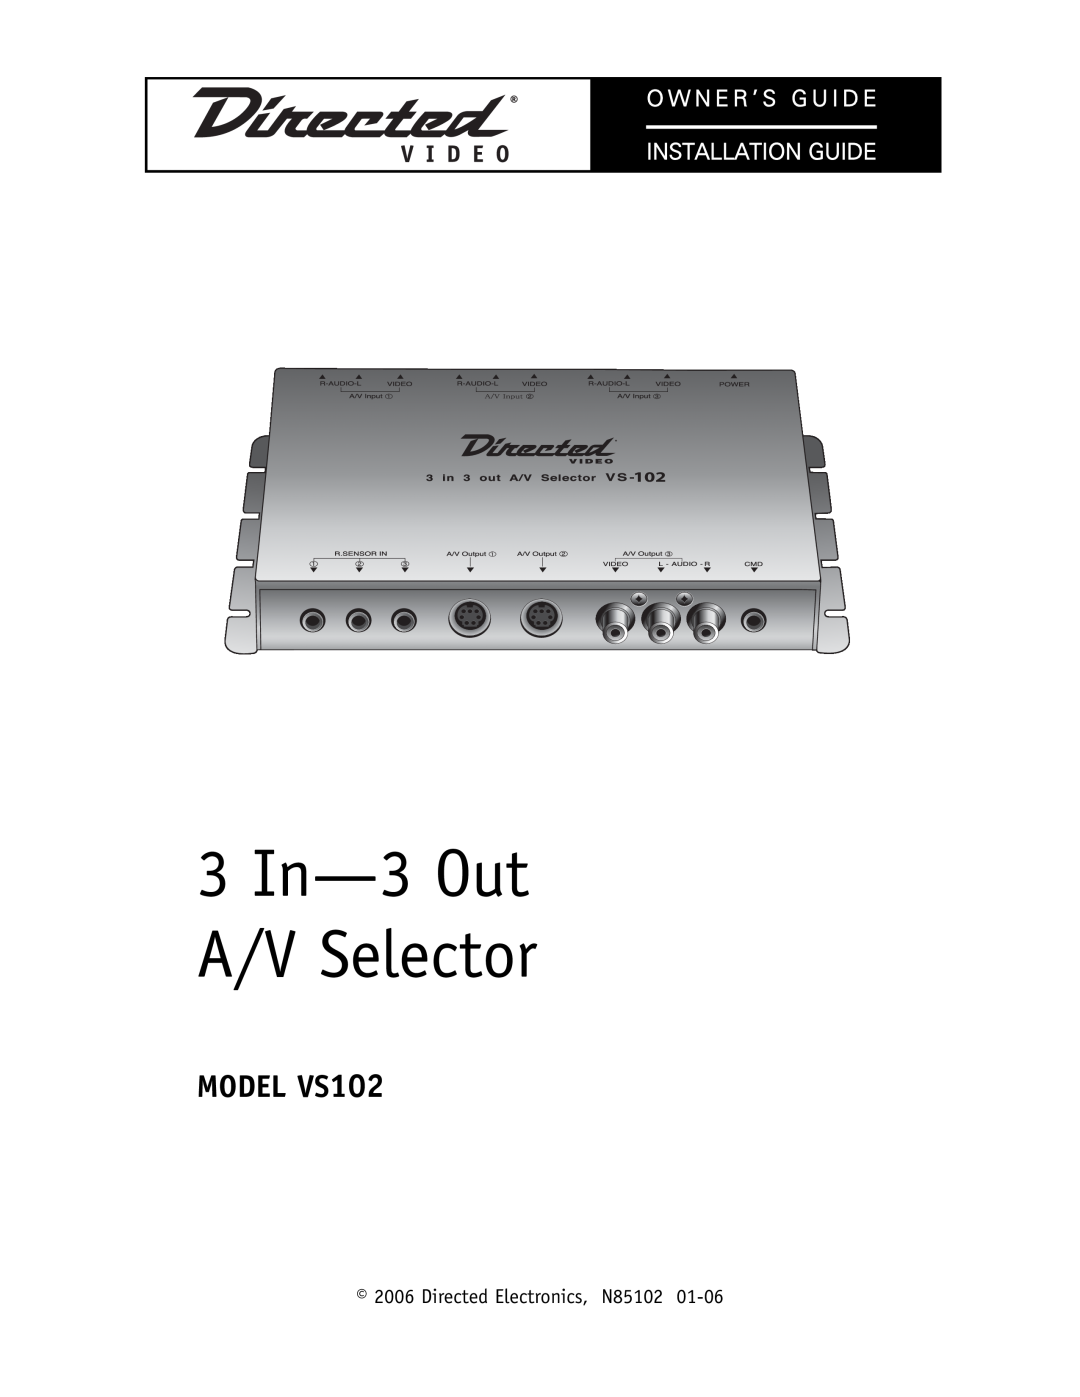 Directed Electronics manual 3 In-3Out A/V Selector, MODEL VS102, O W N E R ’ S G U I D E Installation Guide 